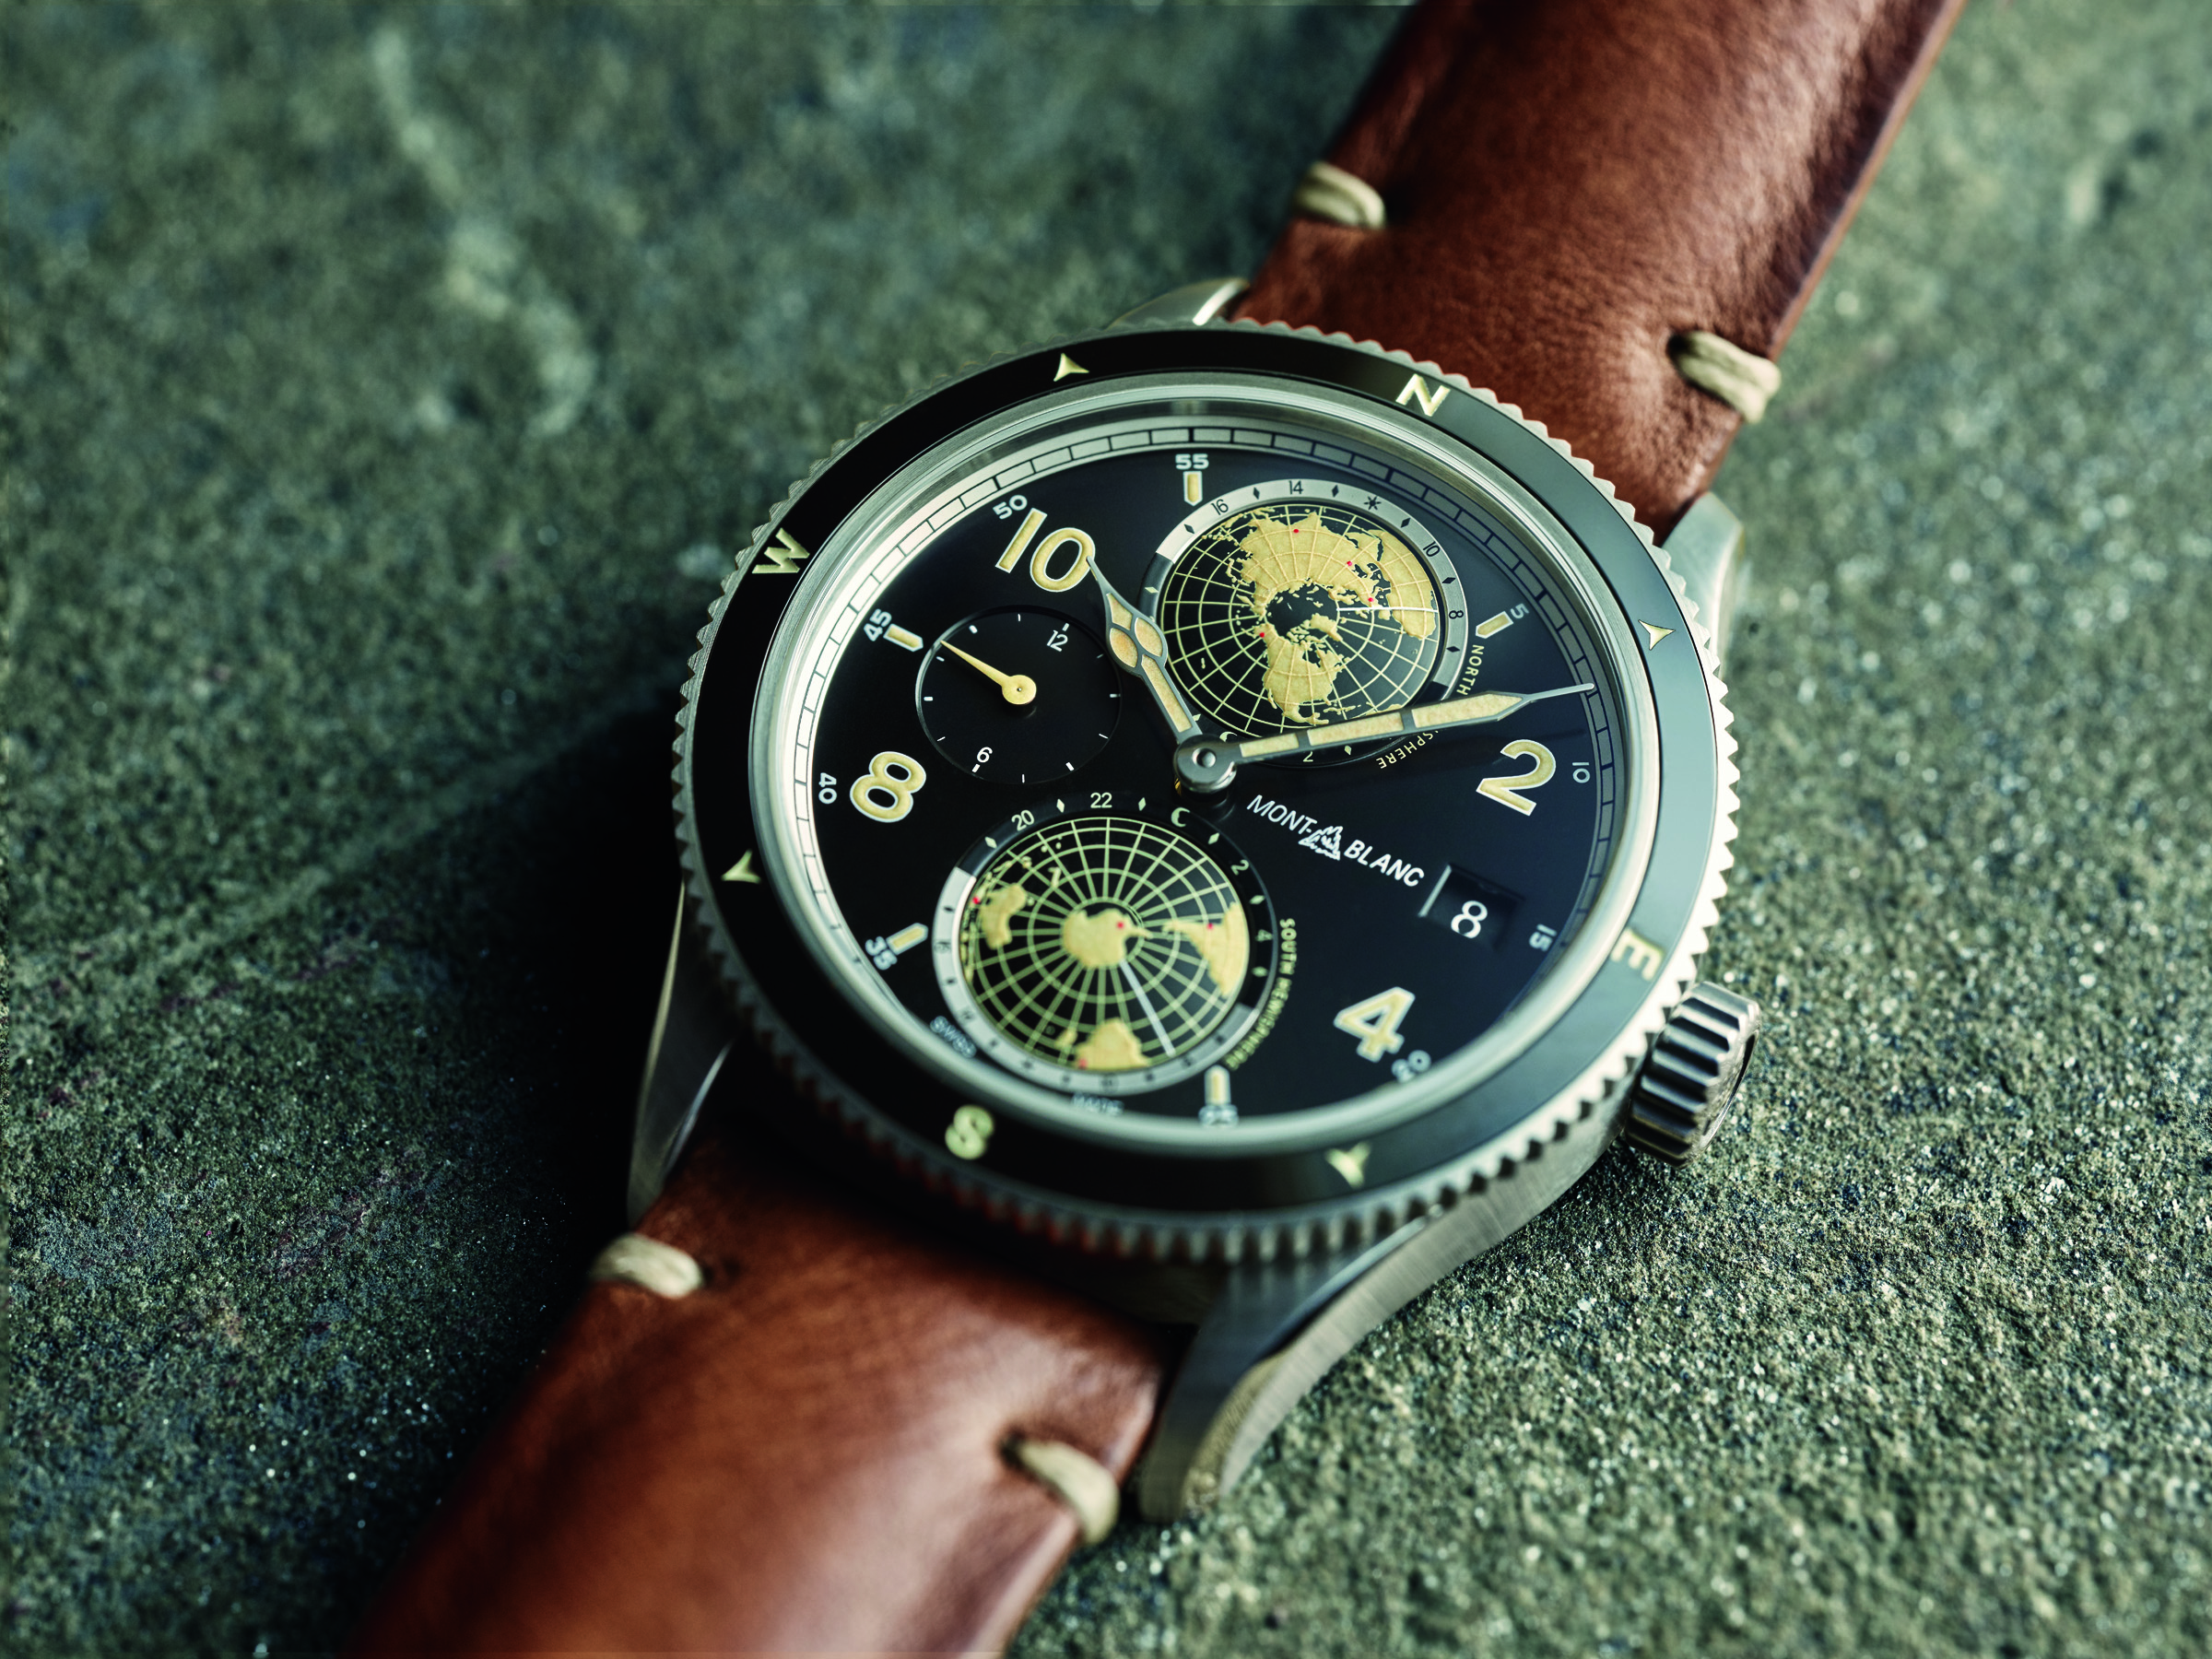 Montblanc 1858 Geosphere Limited Edition 1858. This timepiece features a brand-new manufacture worldtime complication powered by the calibre MB 29.25, developed by the Montblanc engineers in Villeret.